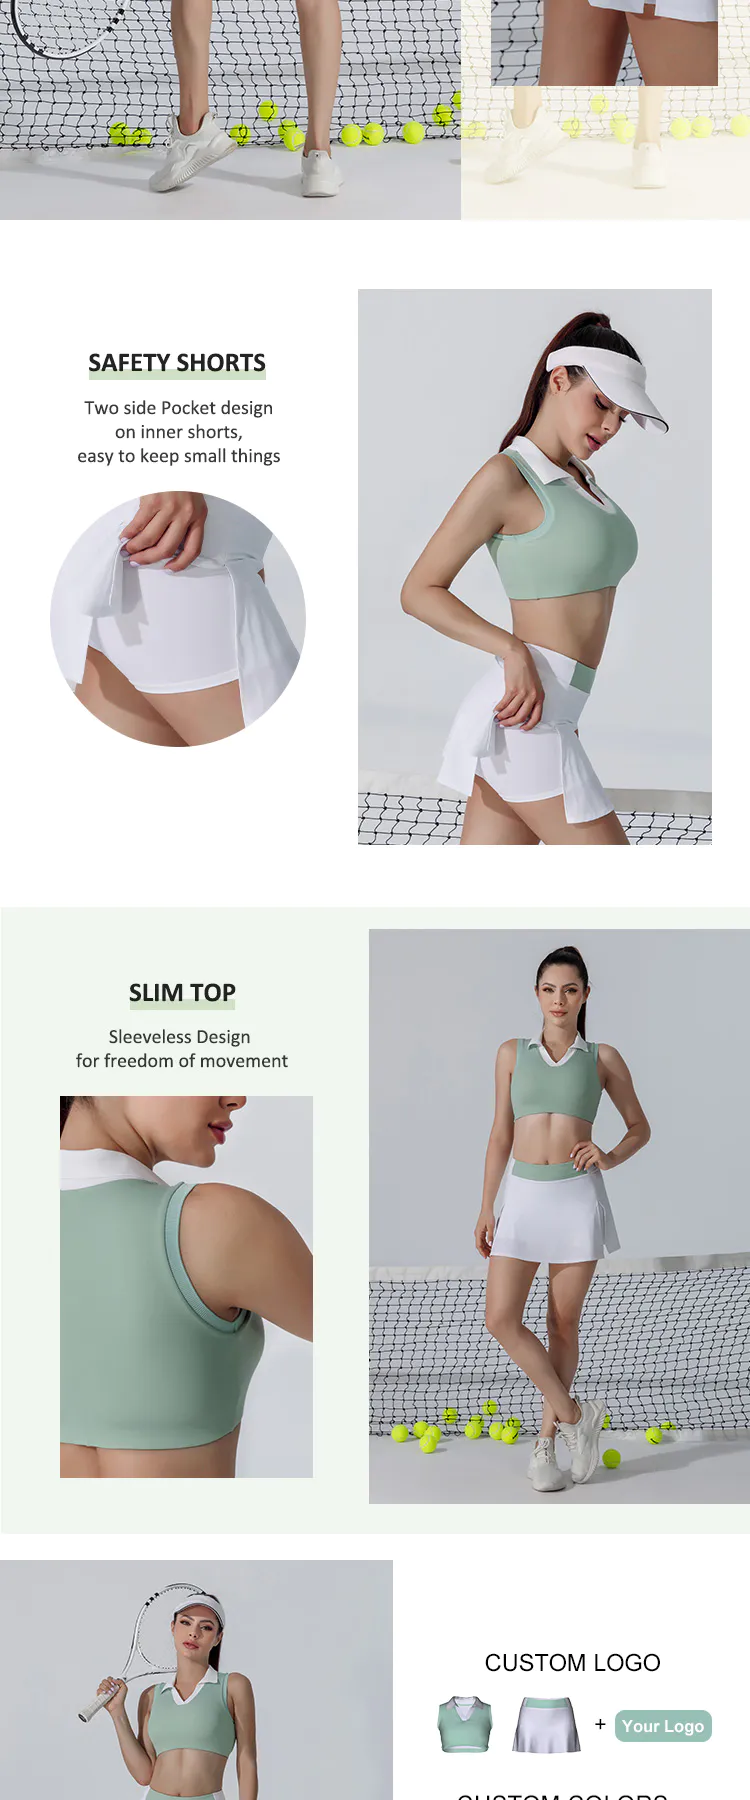 INGOR custom woman tennis clothes solutions for sport